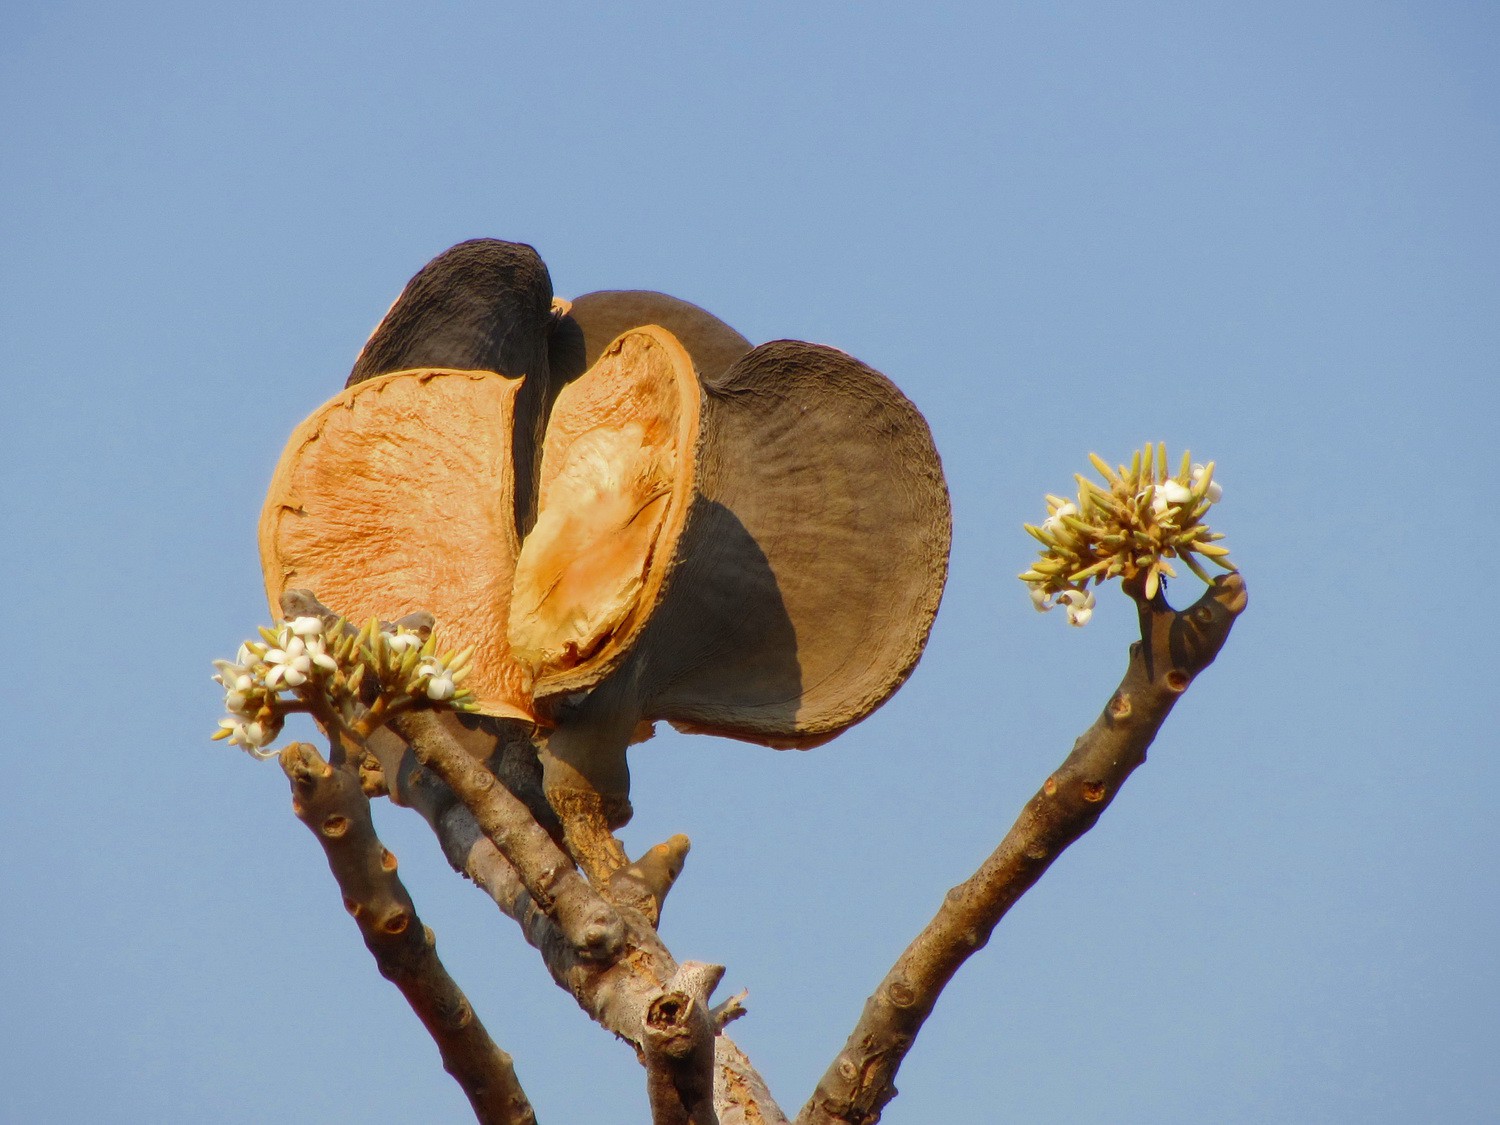 Strange fruits and flowers of a tree